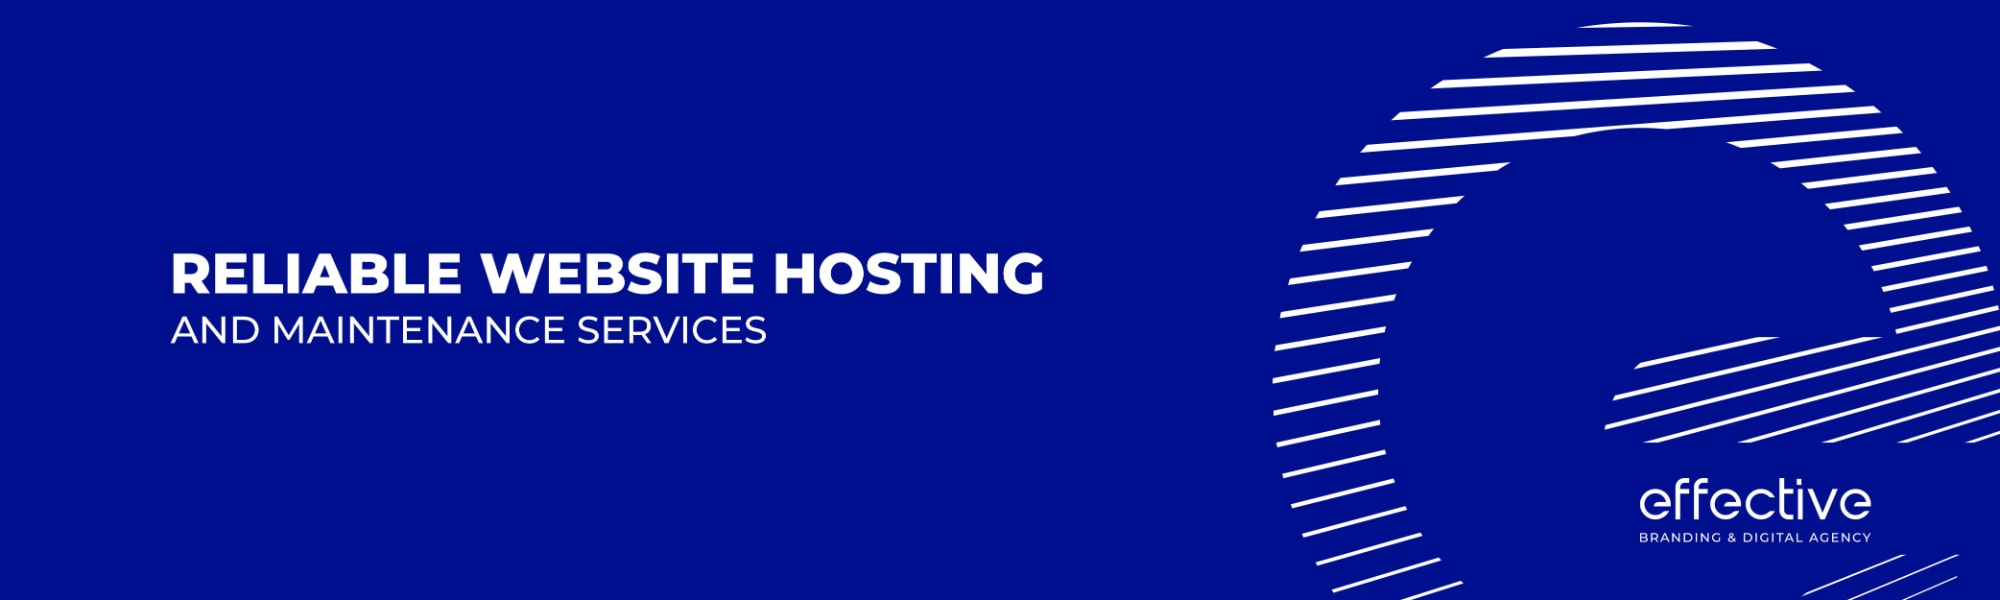 Reliable Website Hosting and Maintenance Services